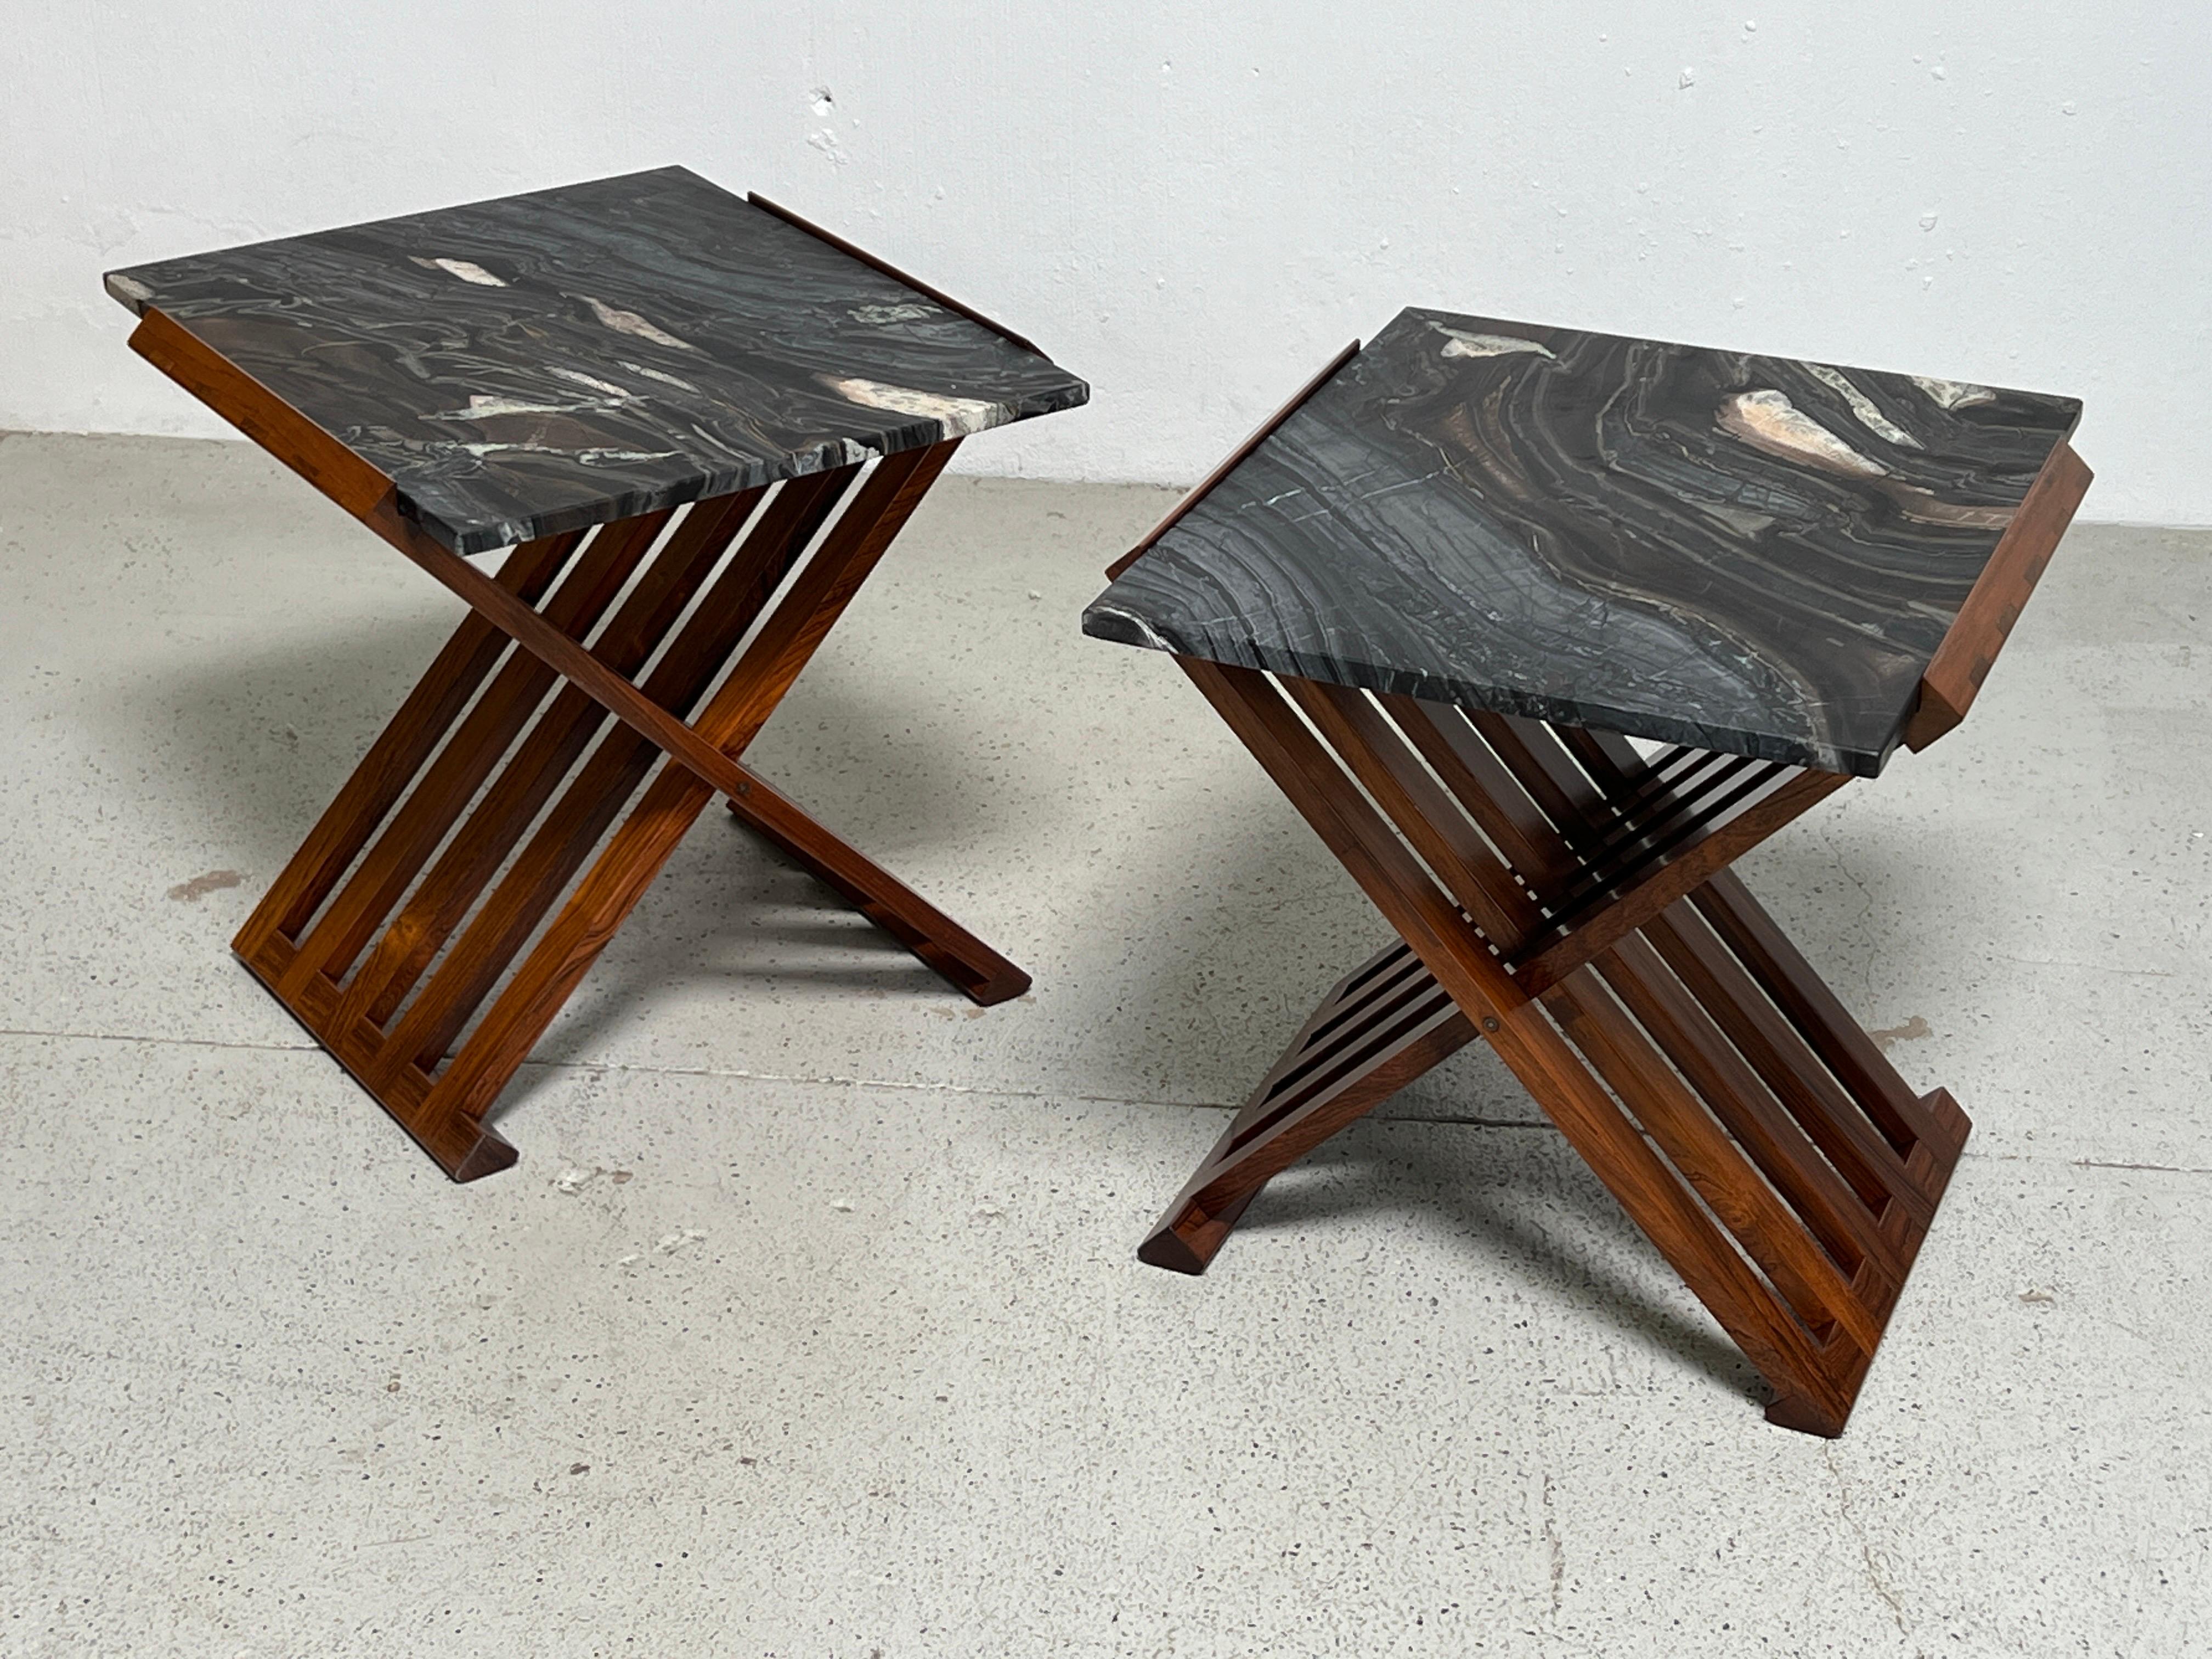 Pair of Rosewood X-Base Tables by Edward Wormley for Dunbar 1